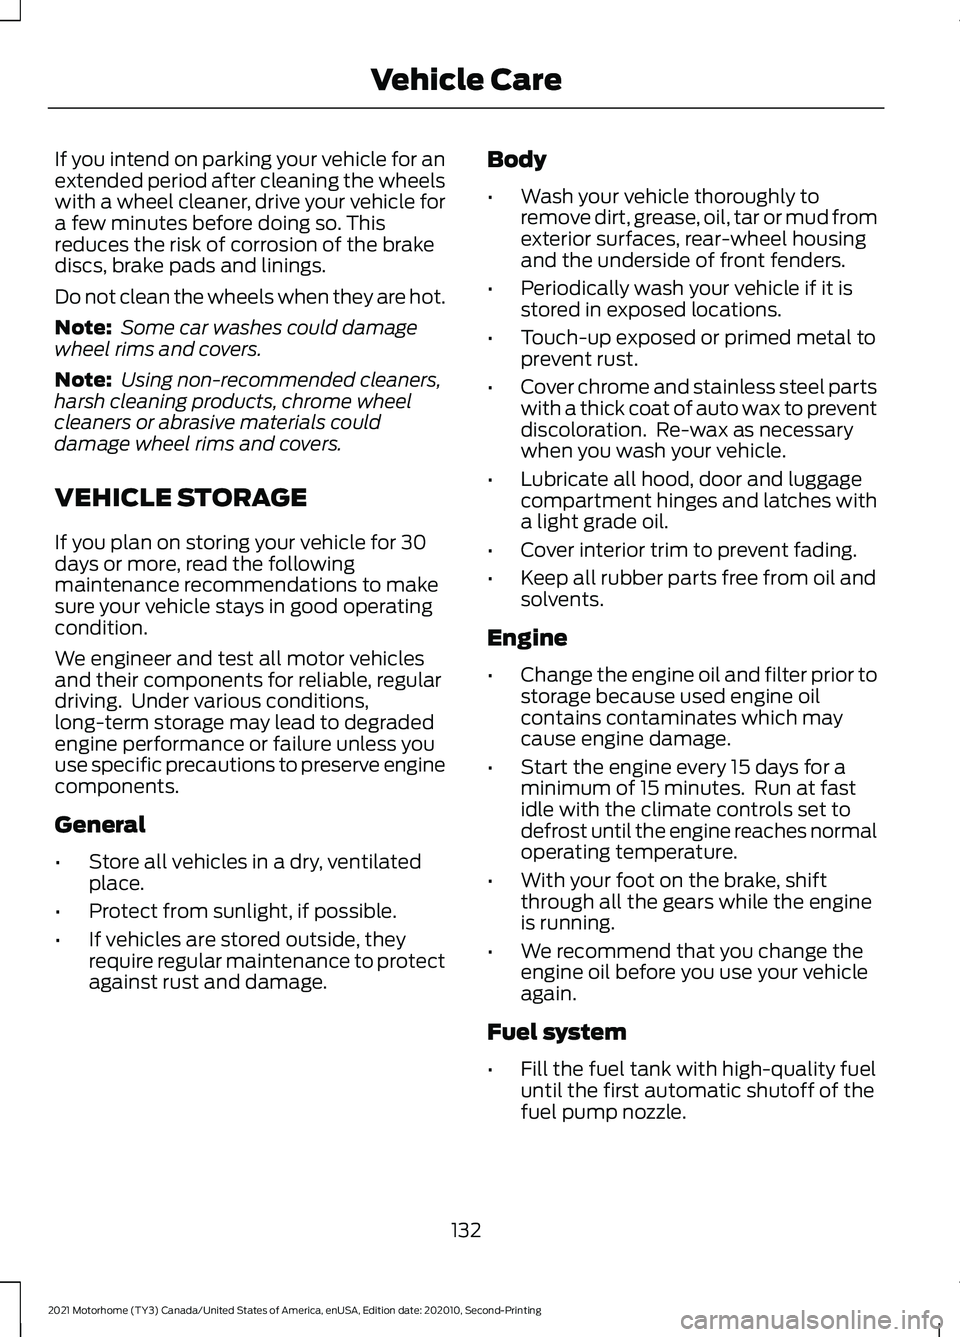 FORD F-53 2021  Owners Manual If you intend on parking your vehicle for an
extended period after cleaning the wheels
with a wheel cleaner, drive your vehicle for
a few minutes before doing so. This
reduces the risk of corrosion of